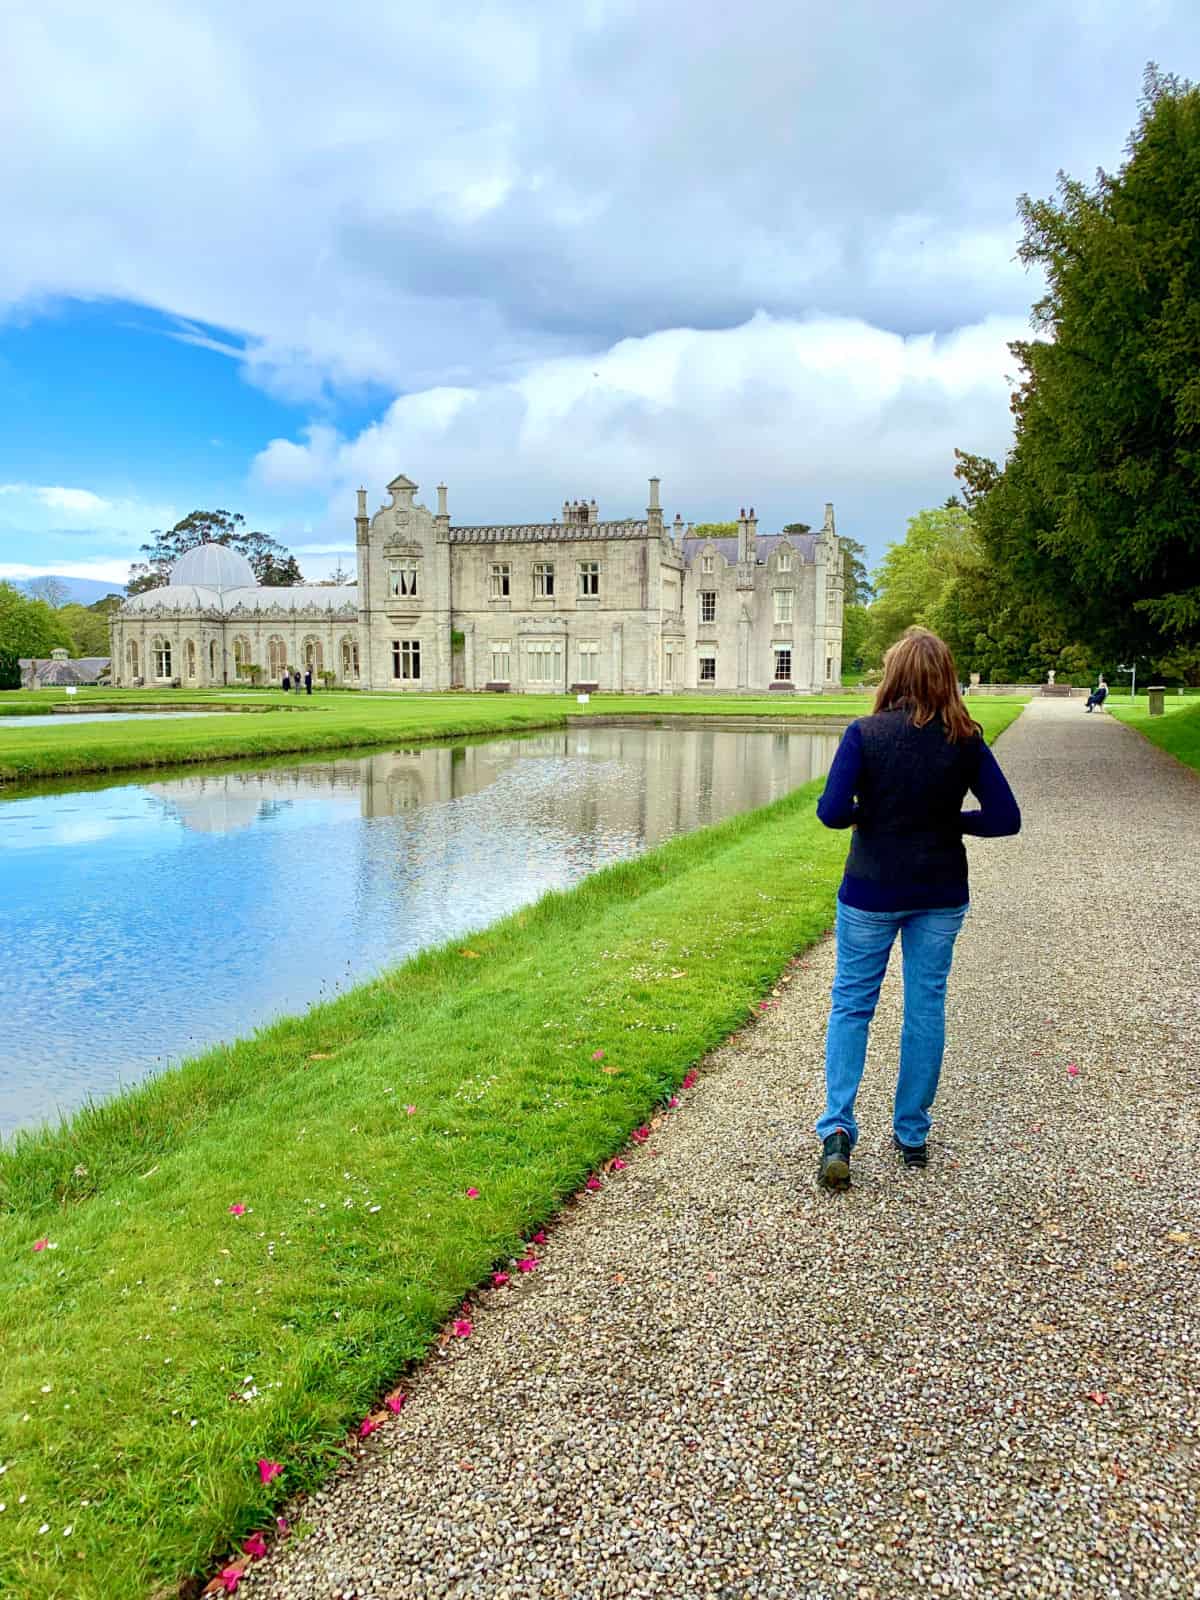 Woman walking next to a lake in front of a castle.